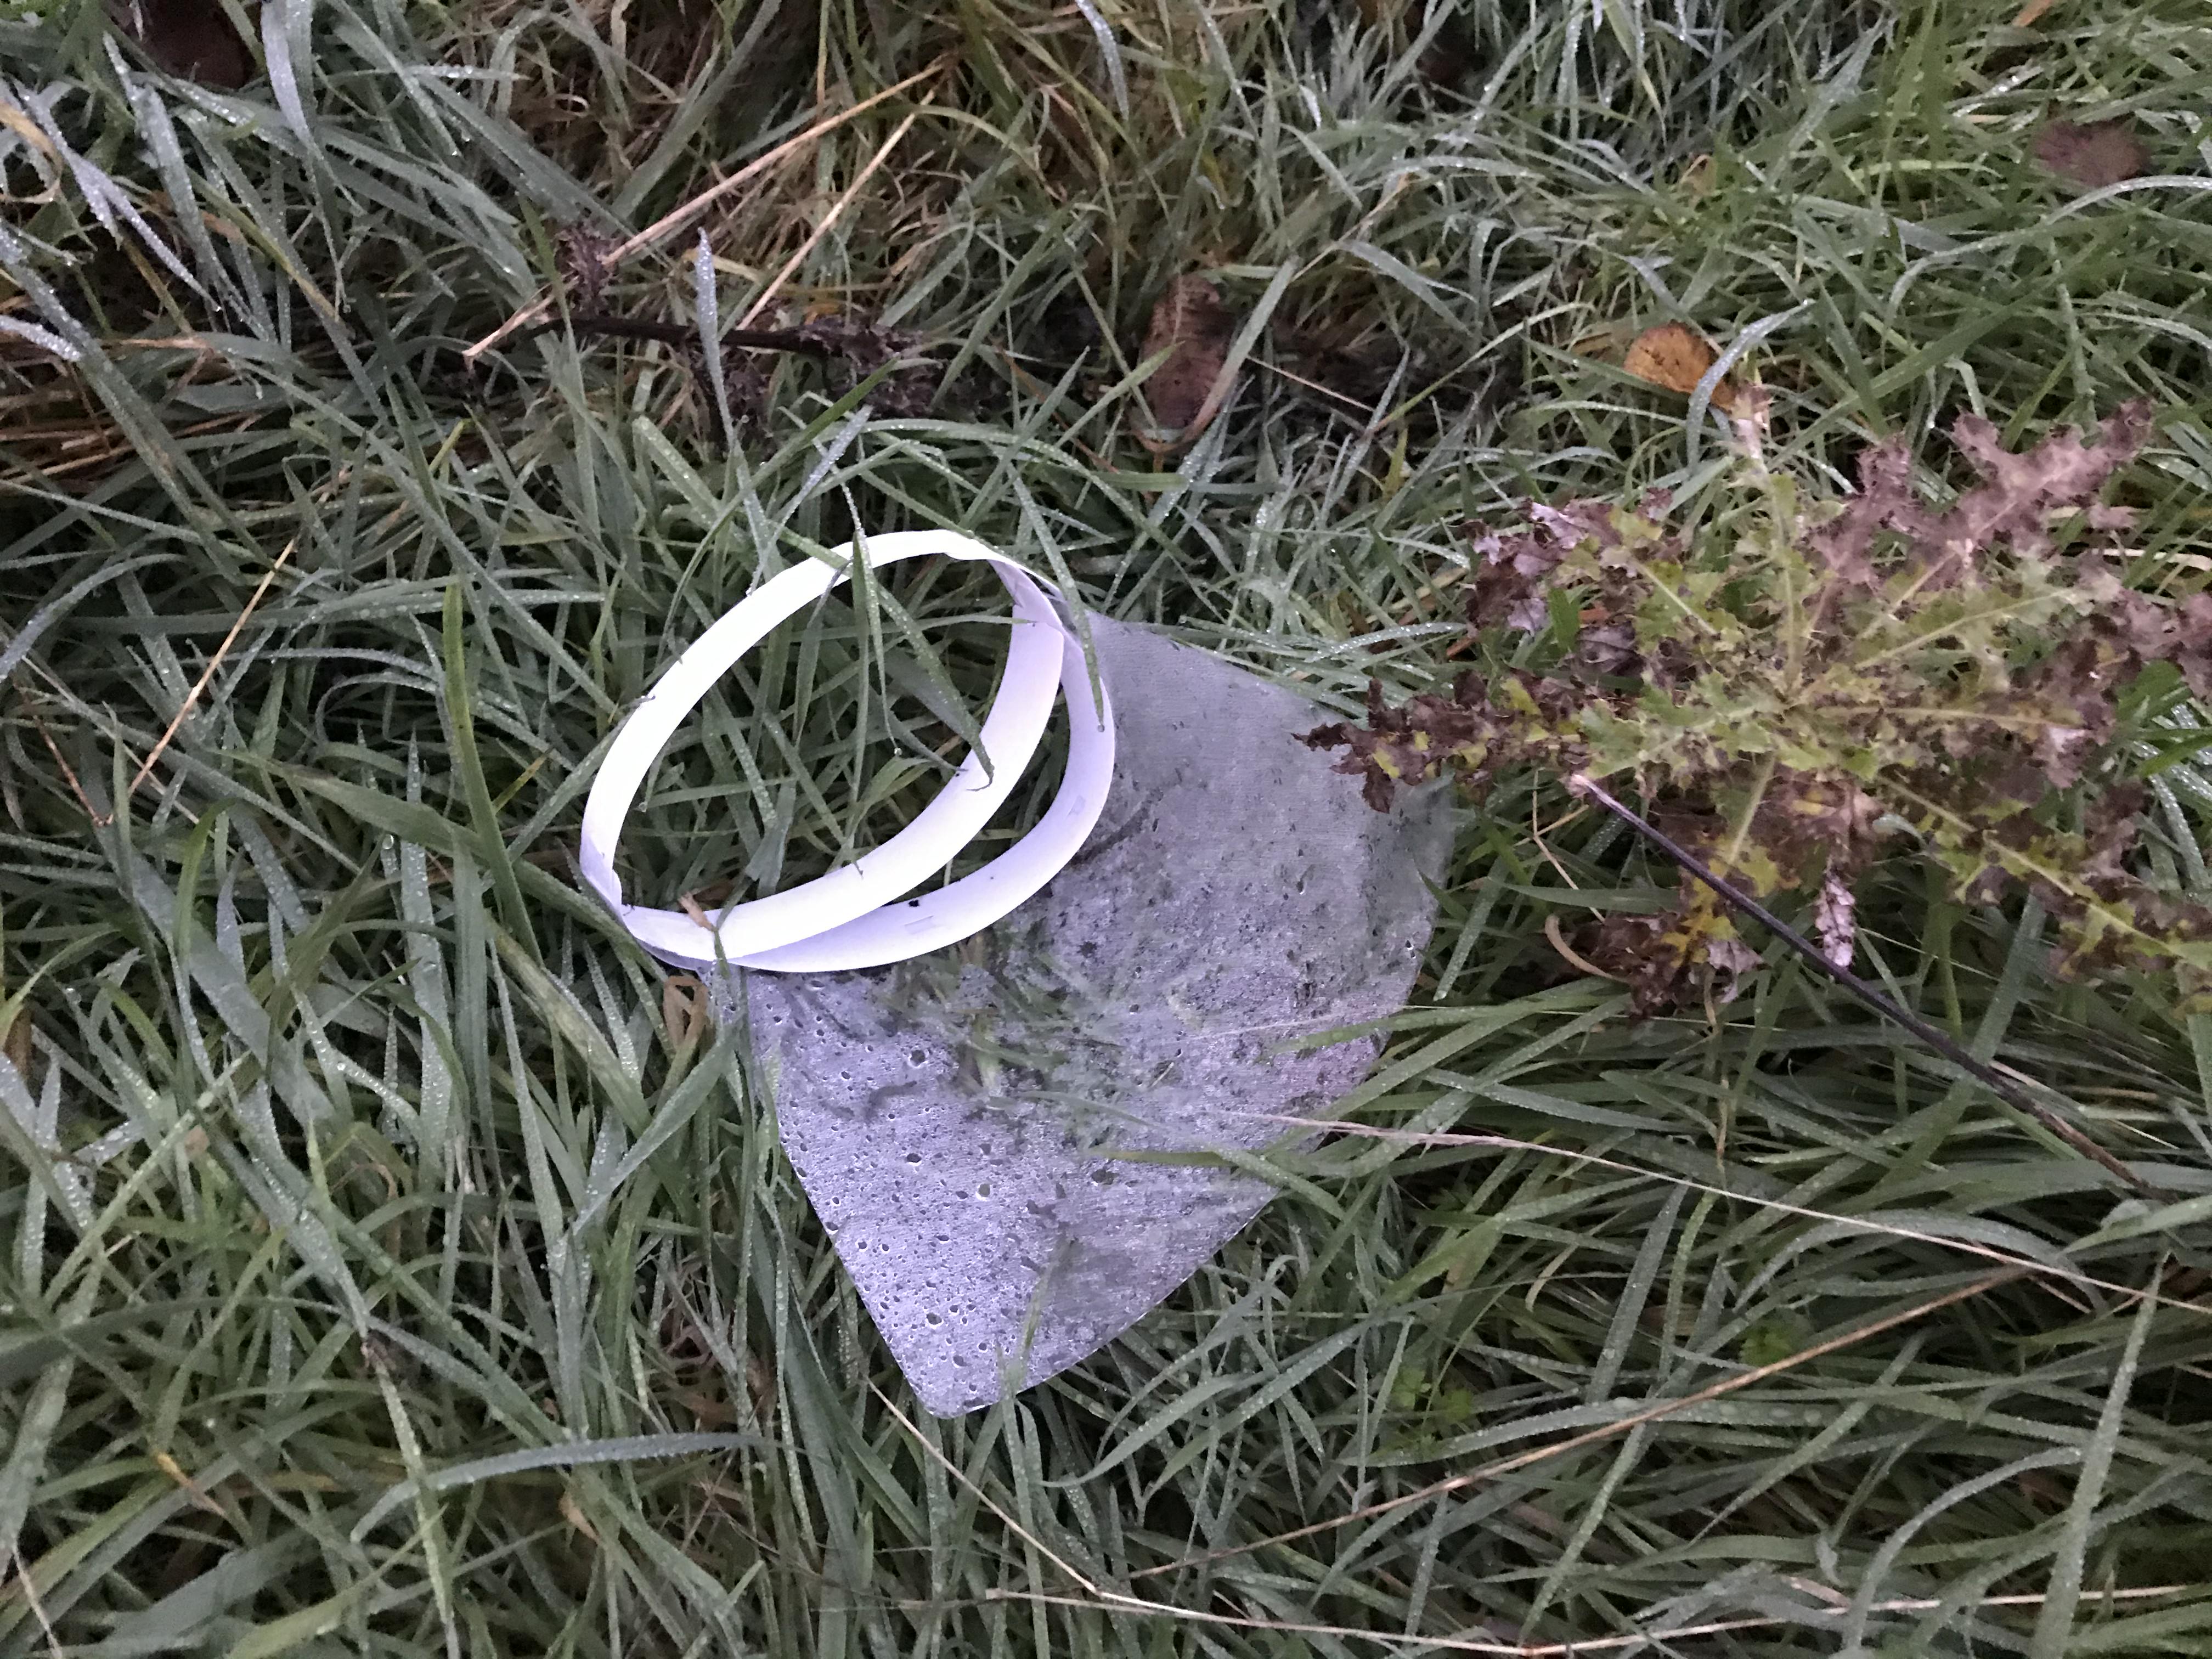 A PPE visor discarded near a beach in Yorkshire (Ana Cowie /Yorkshire Wildlife Trust/PA)